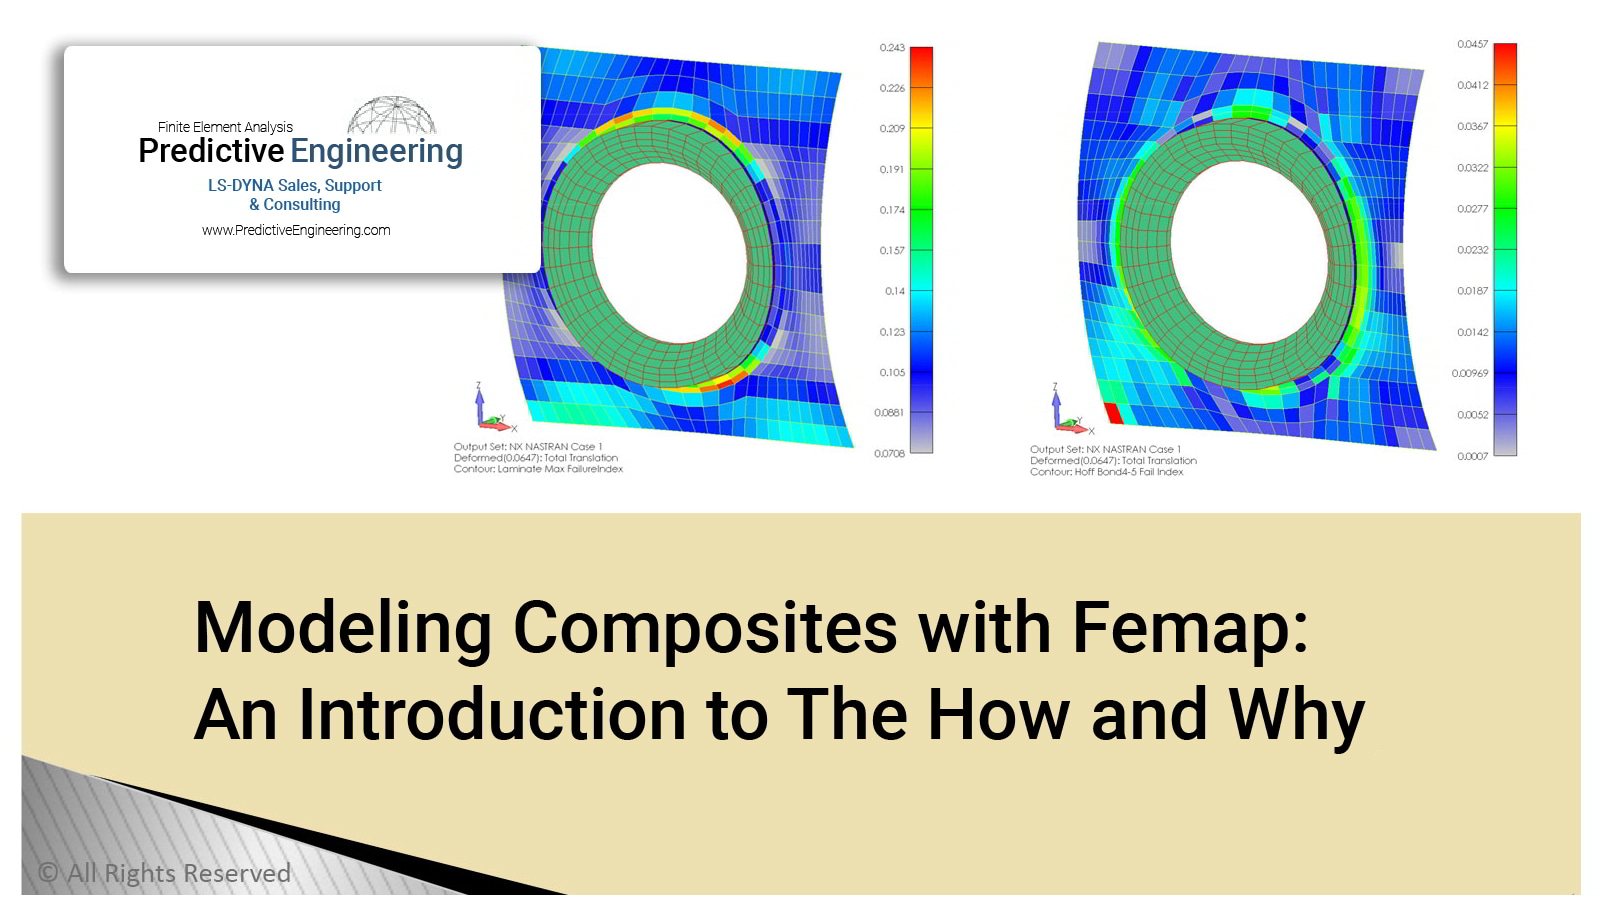 Modeling Composites with Femap